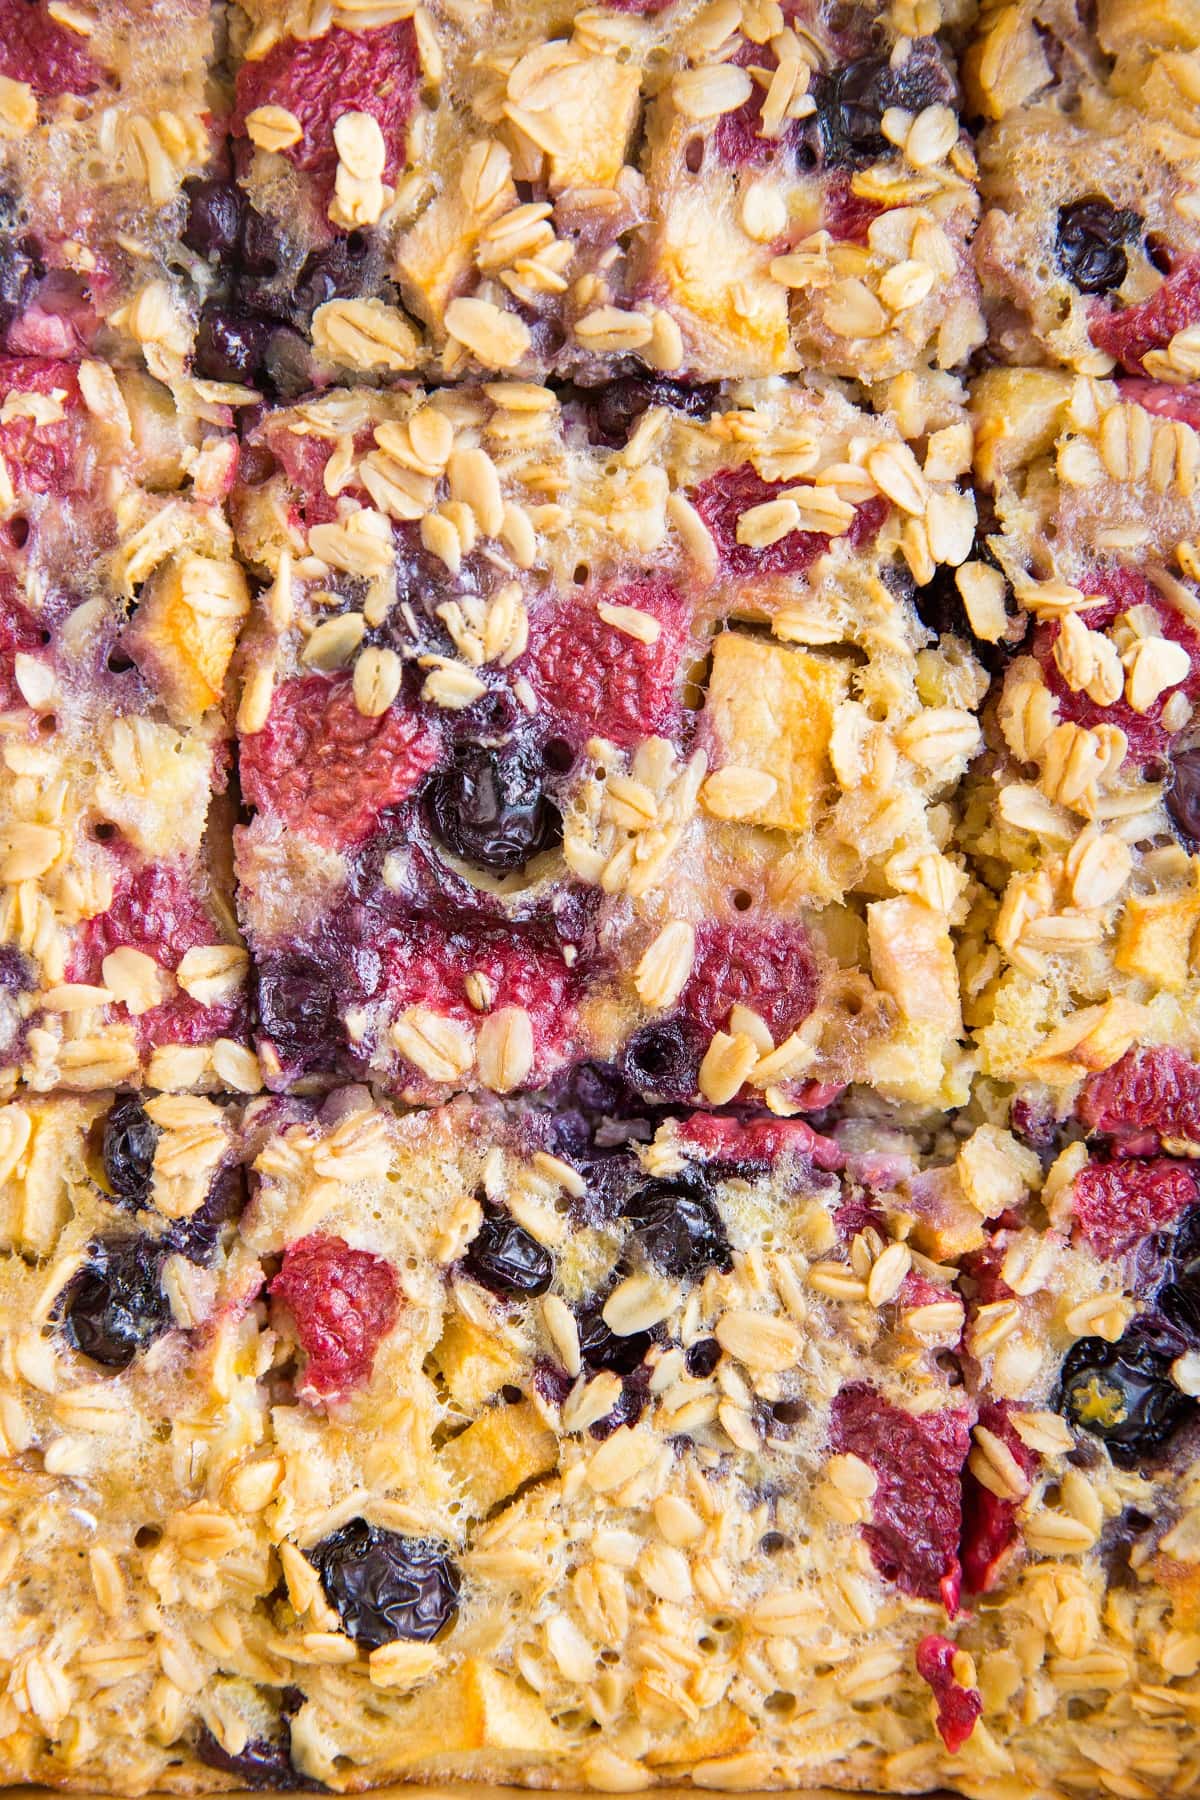 Close up image of berry baked oatmeal cut into slices.